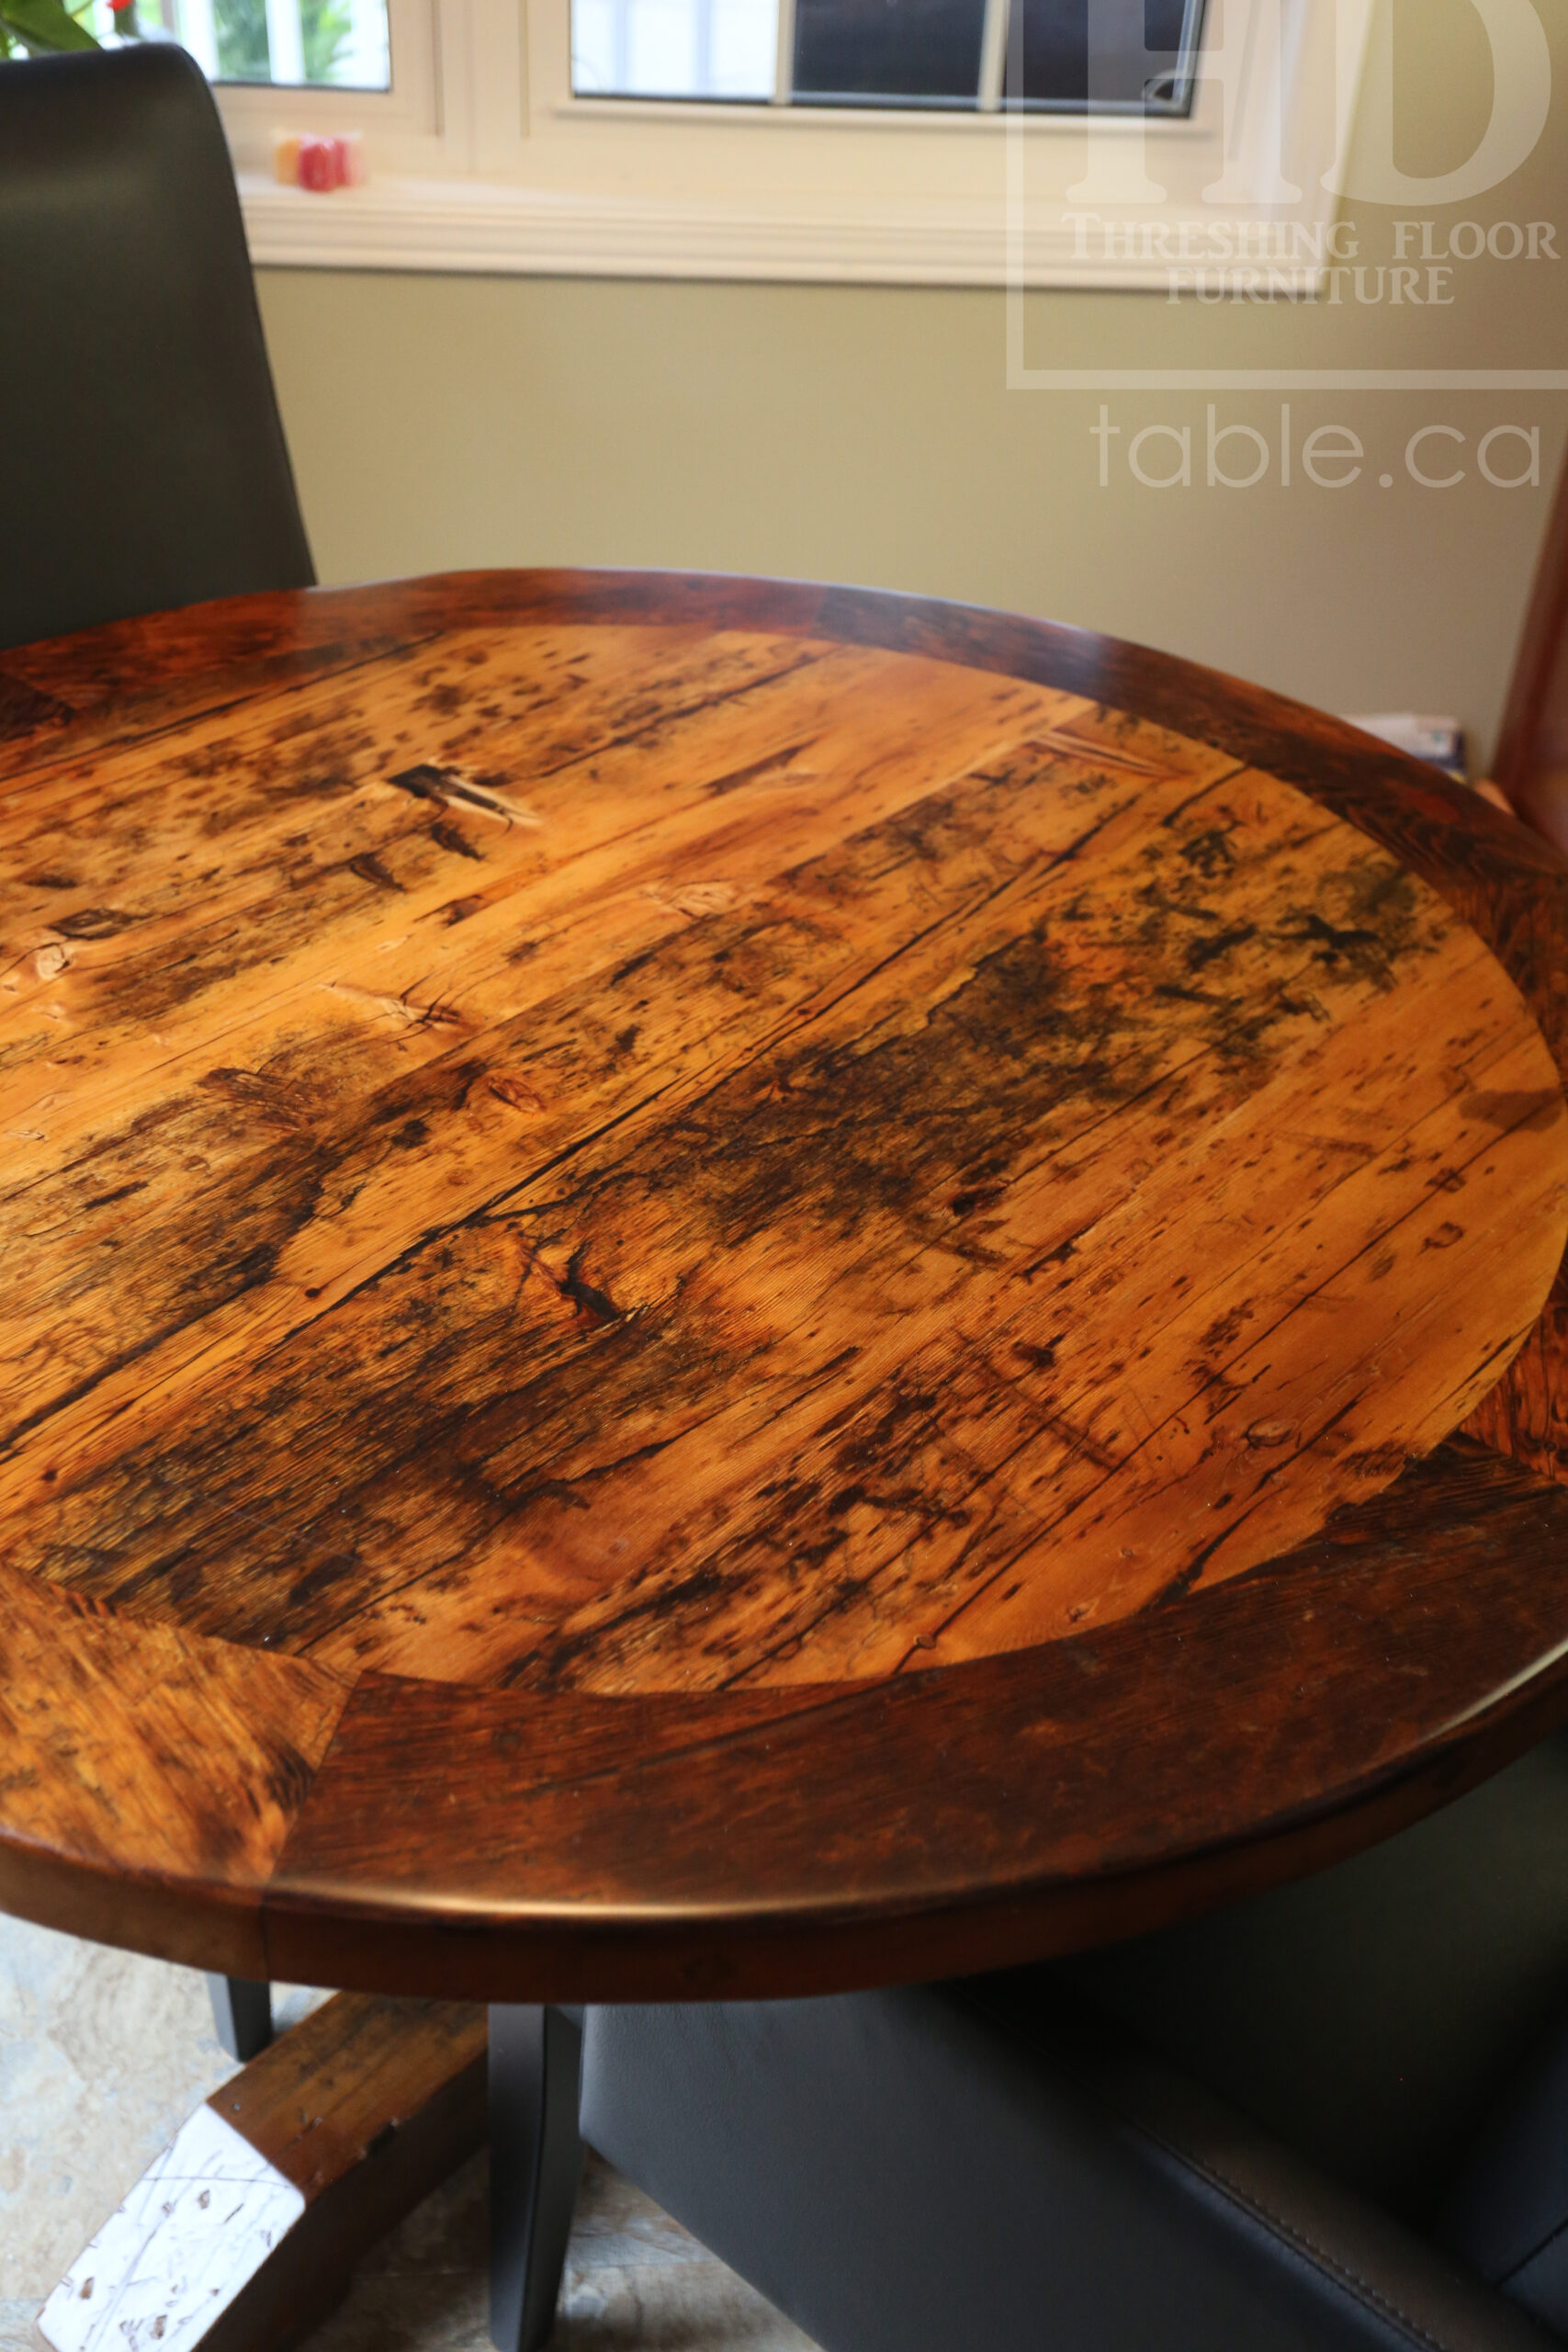 44” Reclaimed Ontario Barnwood Round Table we made for a Waterloo, Ontario home – Pedestal Base - Old Growth Hemlock Threshing Floor Construction – Original edges & distressing maintained – Circular Bread Edges - Premium epoxy + satin polyurethane finish – 2 Black Arm Topgrain Leather Parsons Chairs - www.table.ca